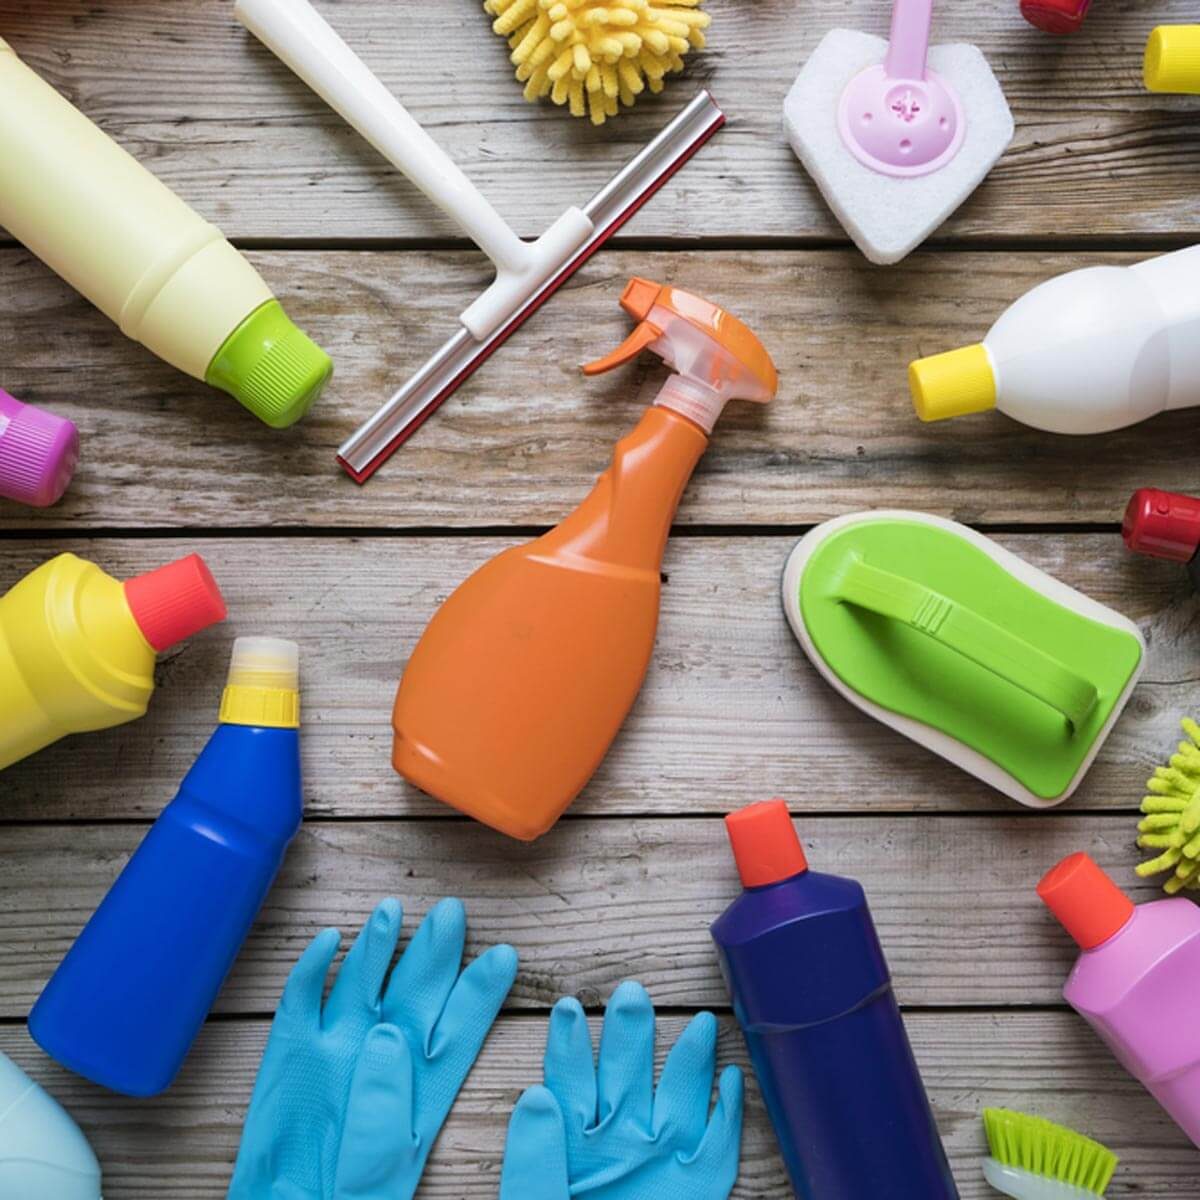 40+ Essential Household Items to Replace After a PCS: Cleaning Supplies,  Food, & More